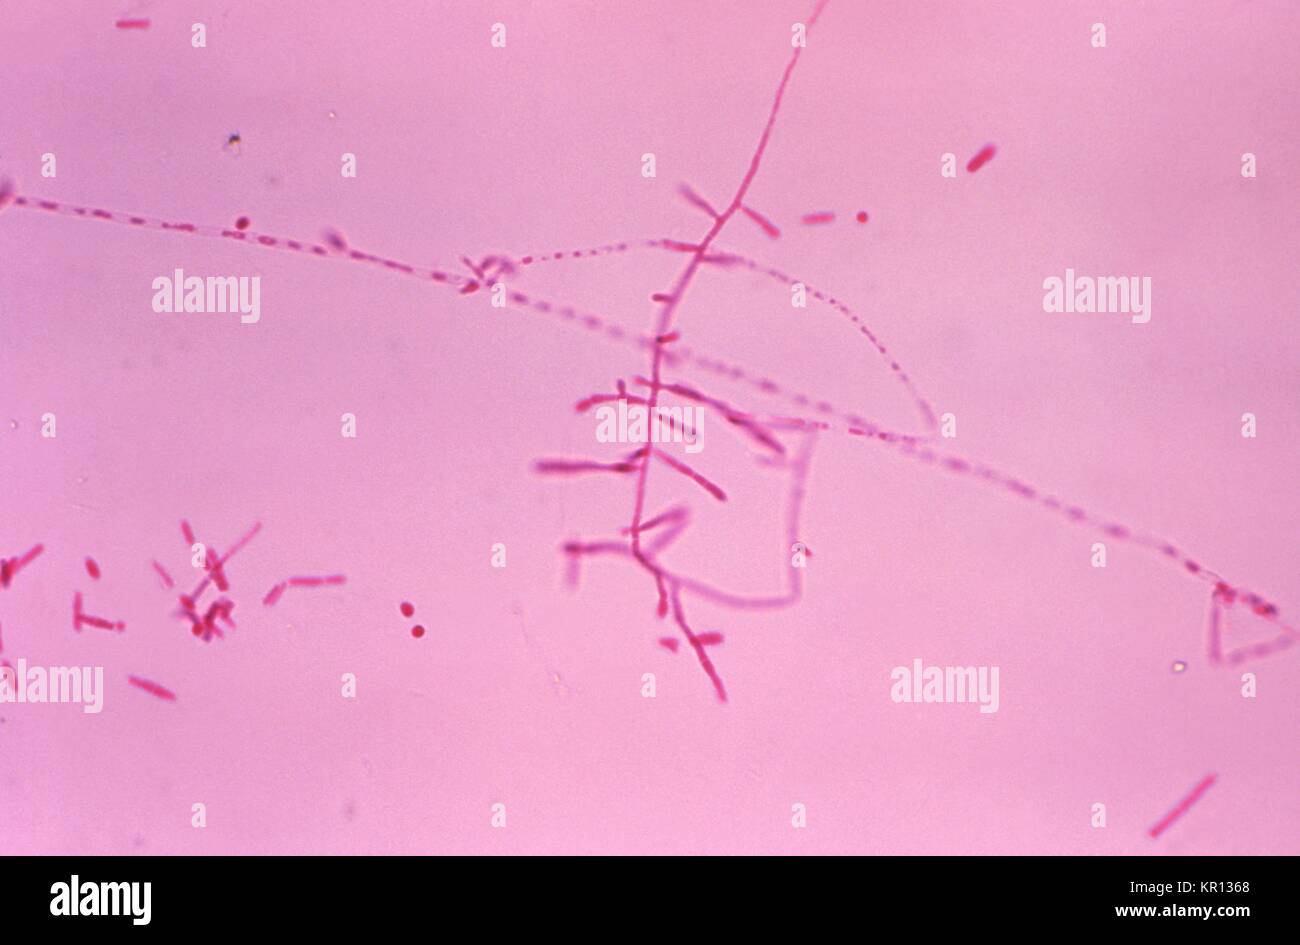 This is a photomicrograph of Trichophyton mariatii during a hair perforation test, 1979. Members of the genus Trichophyton inhabits the soil, humans or animals and is one of the leading causes of hair, skin and nail infections, i.e. dermatophytosis, in humans. Image courtesy CDC/Dr. Arvind A. Padhye. Stock Photo